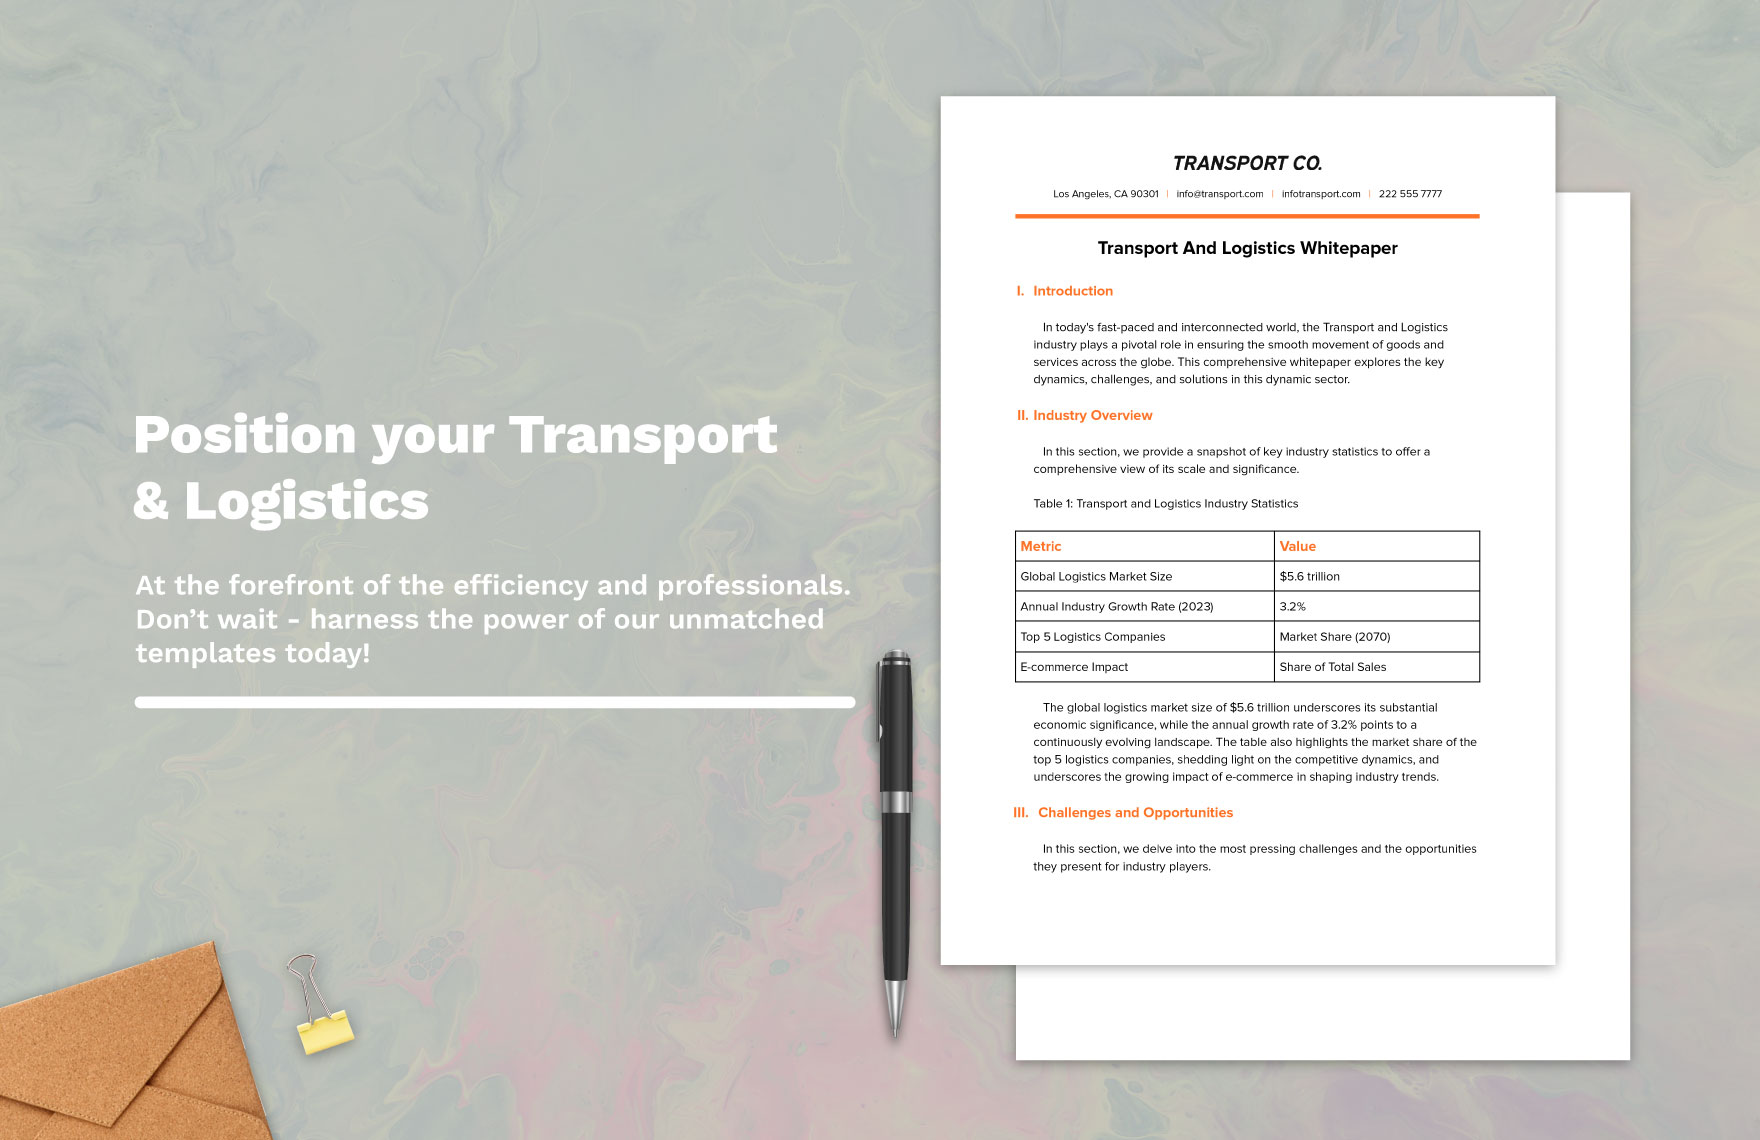 Transport and Logistics Whitepaper Template